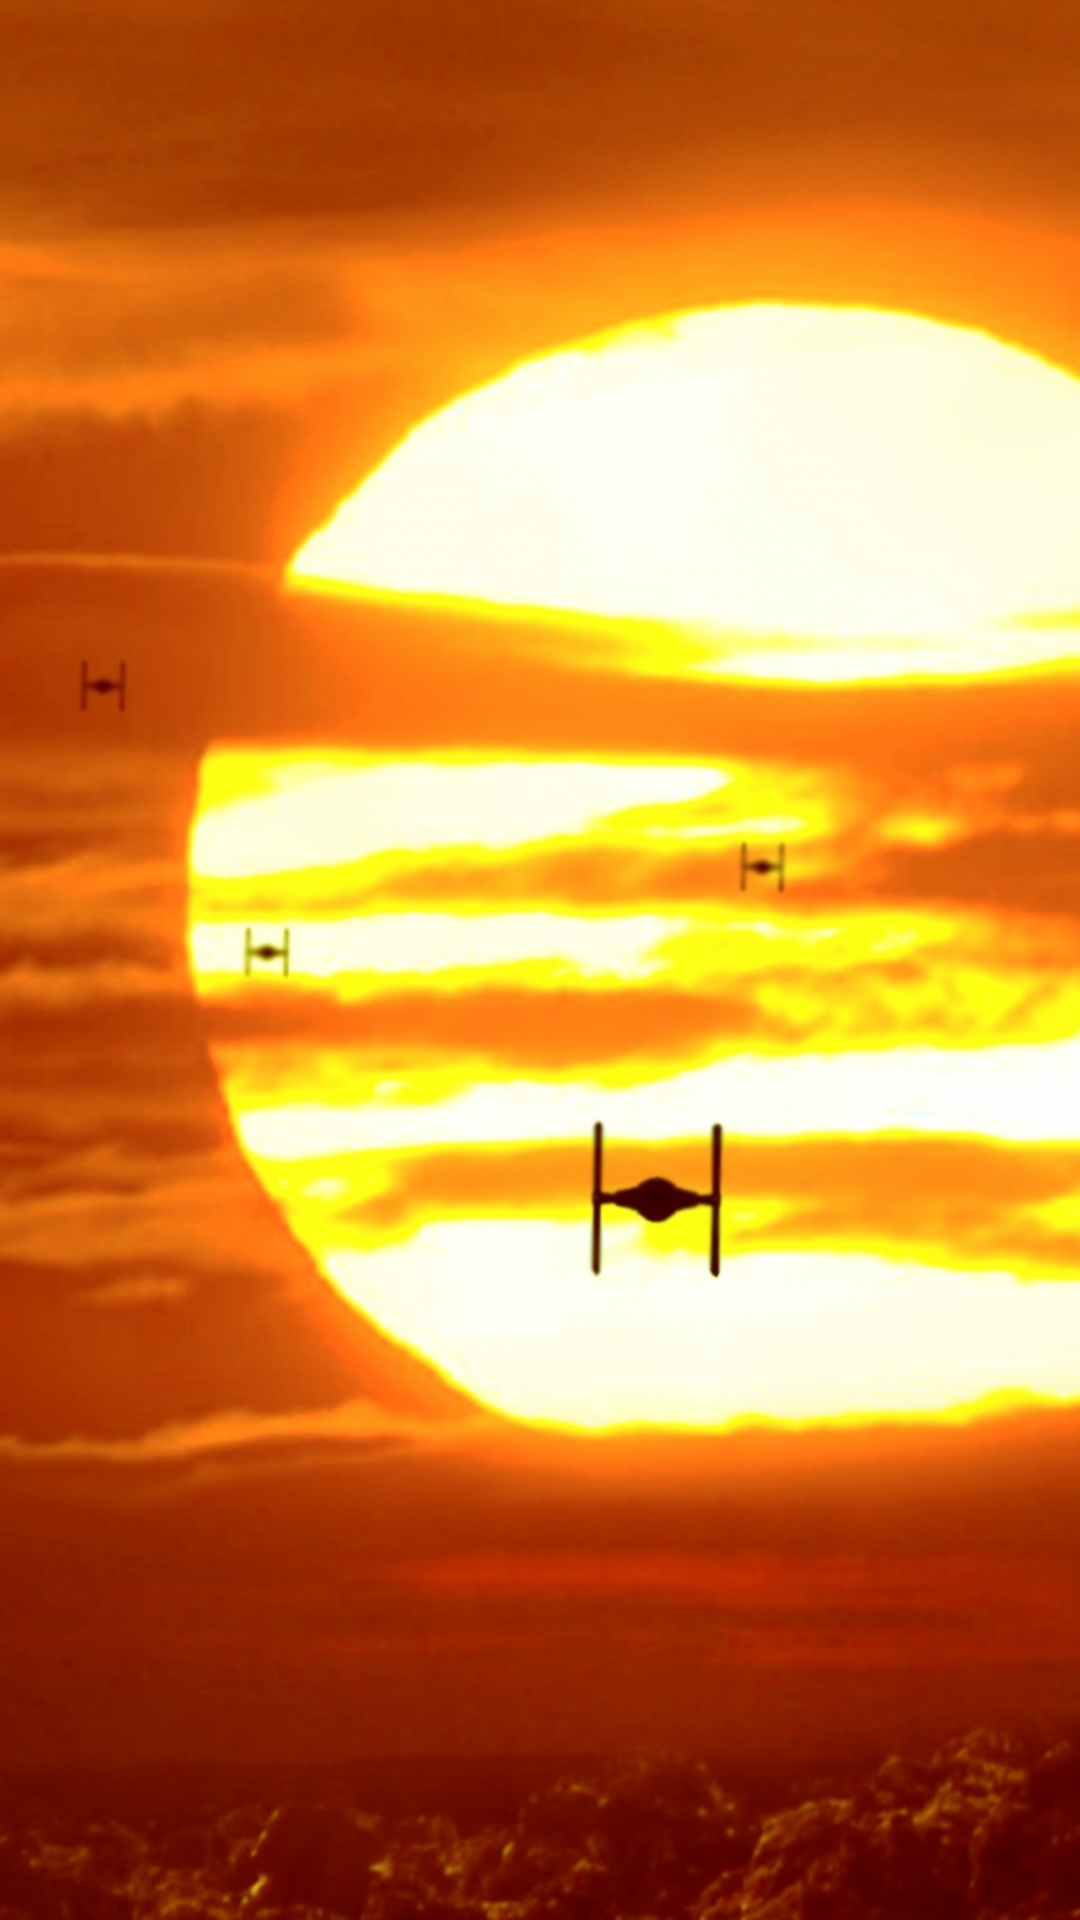 star wars wallpaper for walls,afterglow,horizon,red sky at morning,sky,sunrise